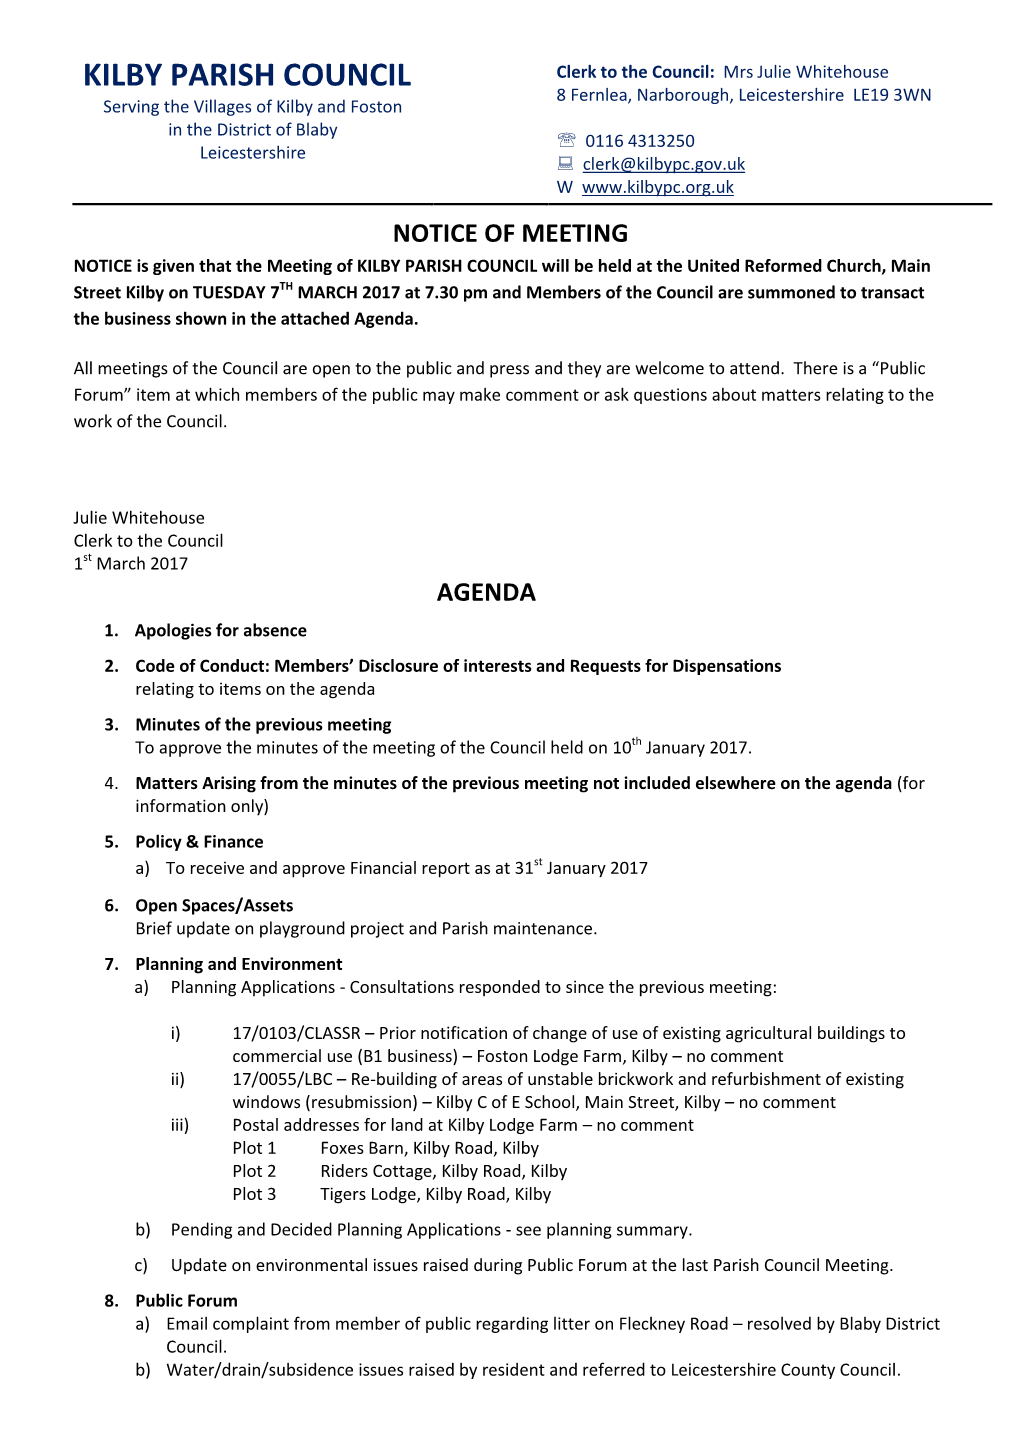 Agenda for Parish Council Meeting on 7Th March